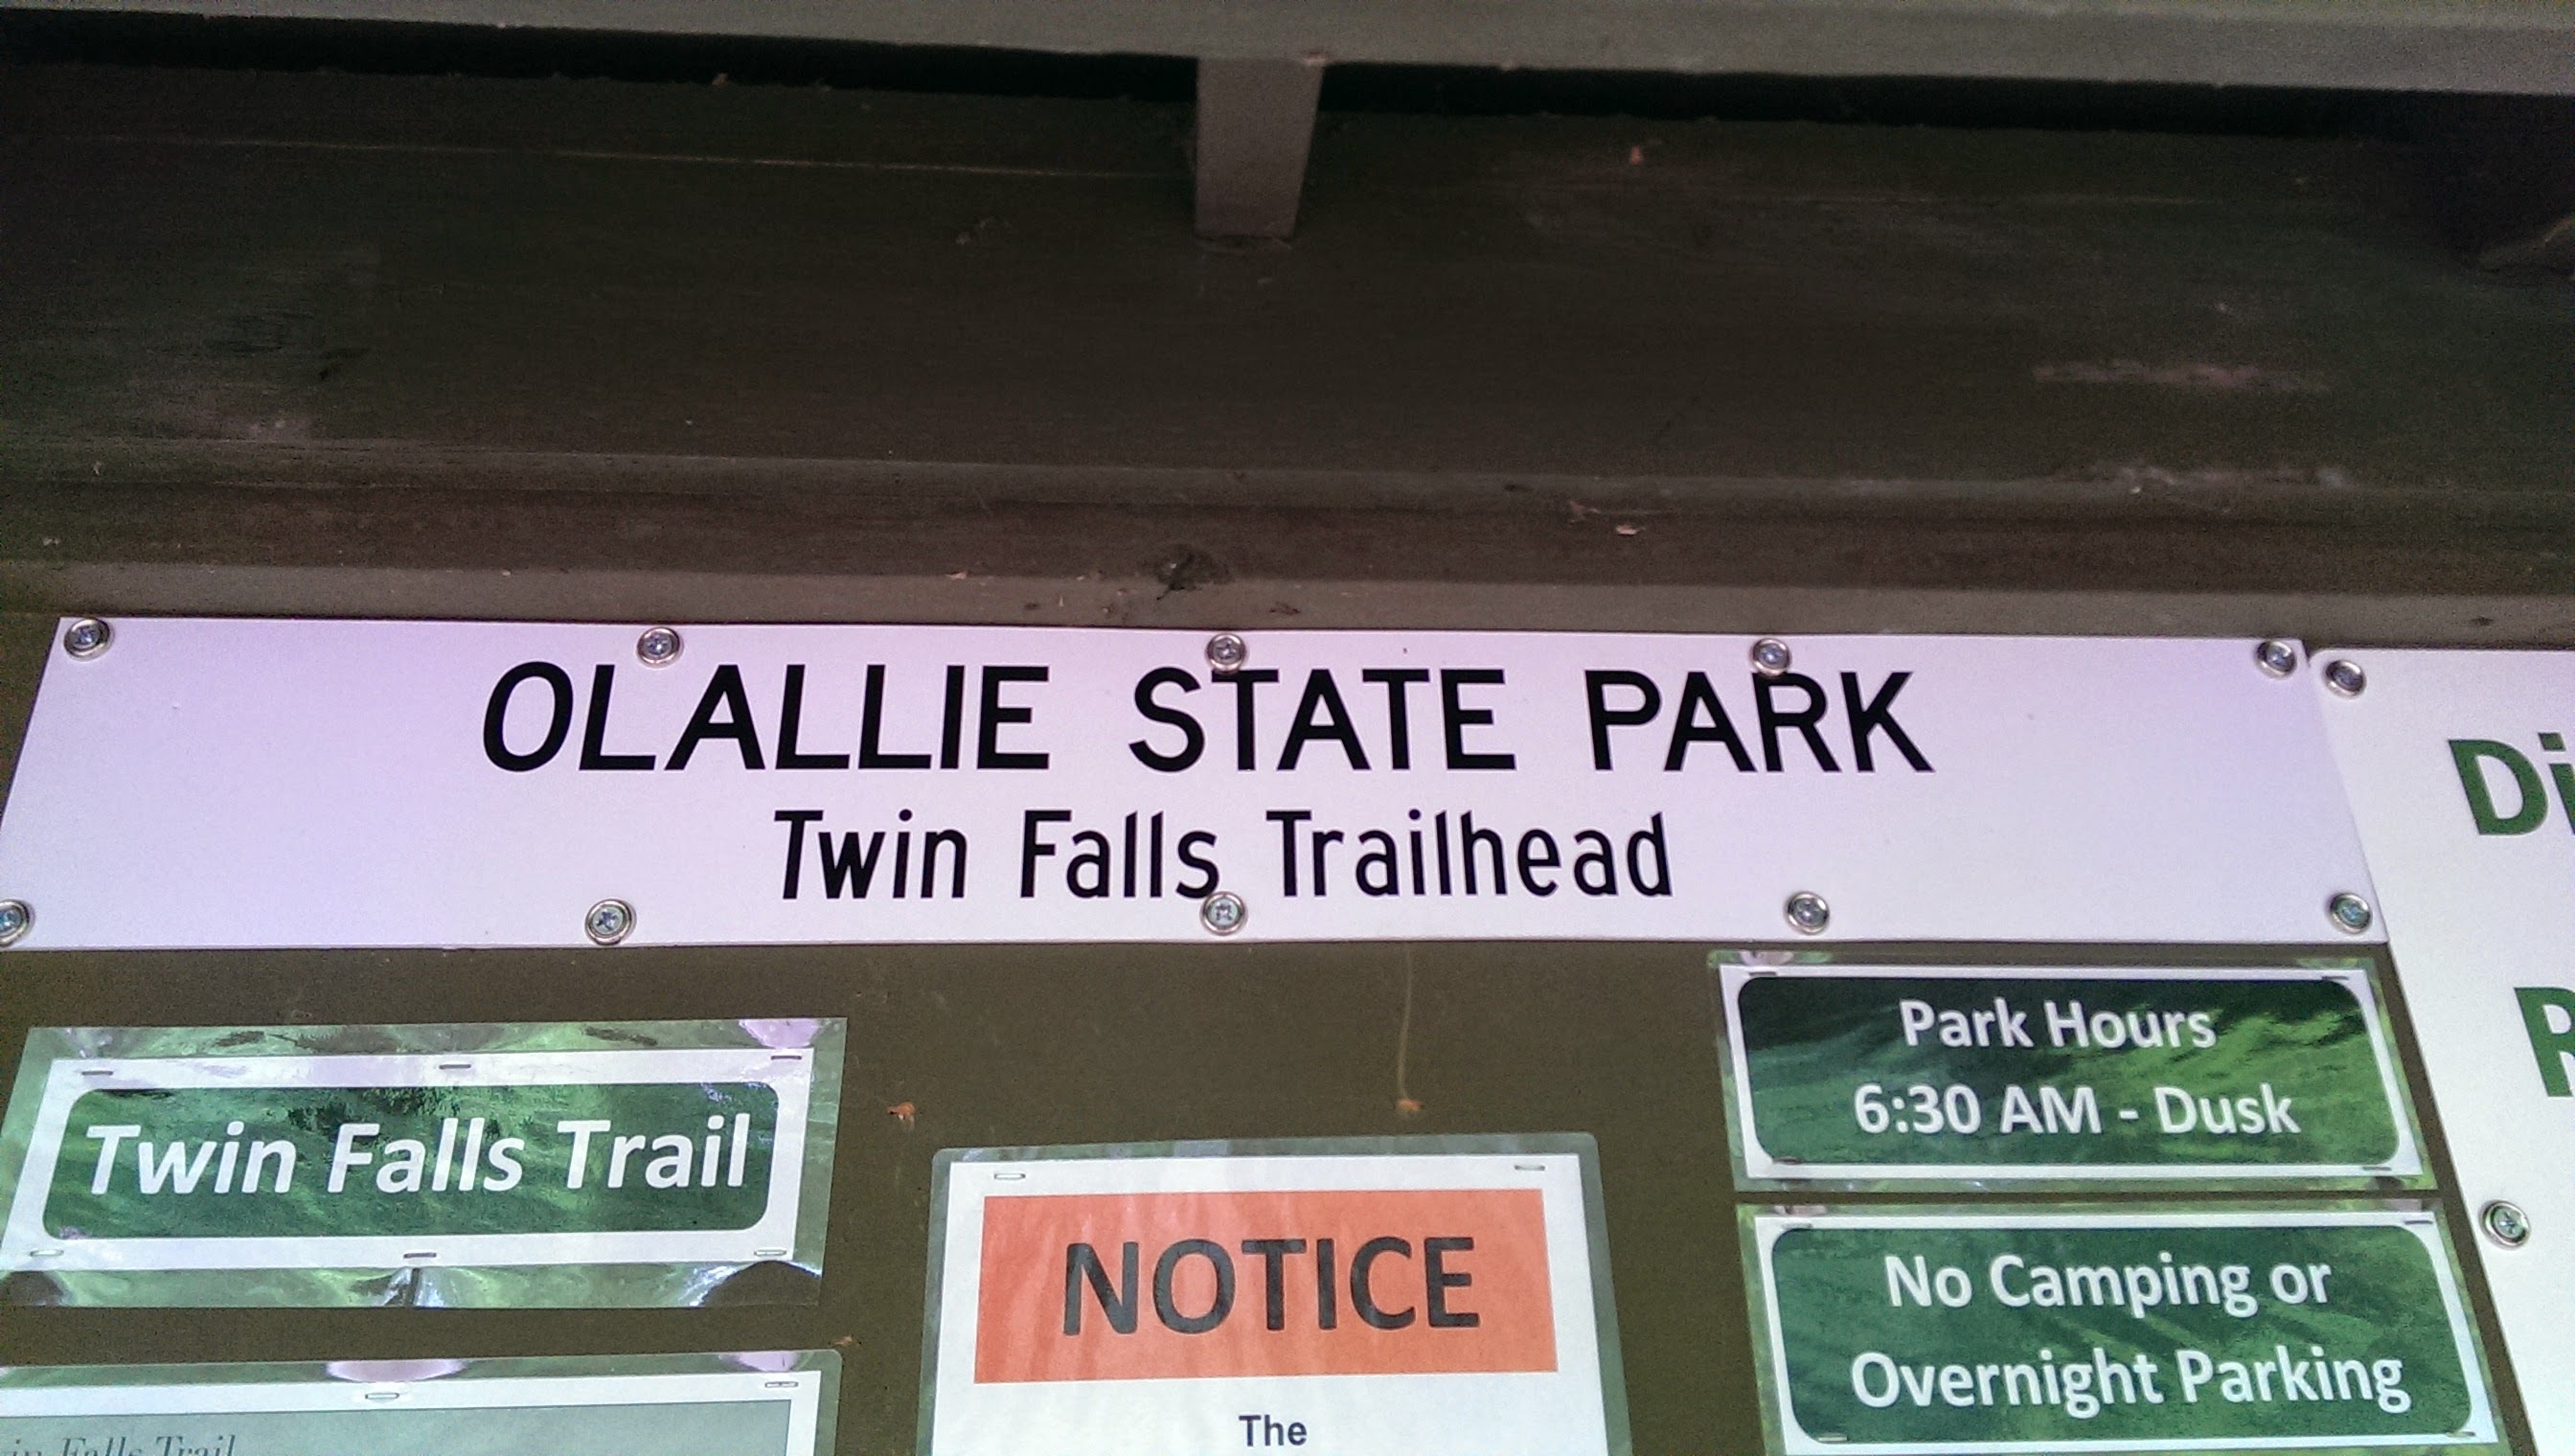 An information board at the Olallie State Park Twin Falls Trailhead. The sign states park hours are from 6 am to dusk and prohibits camping and overnight parking.